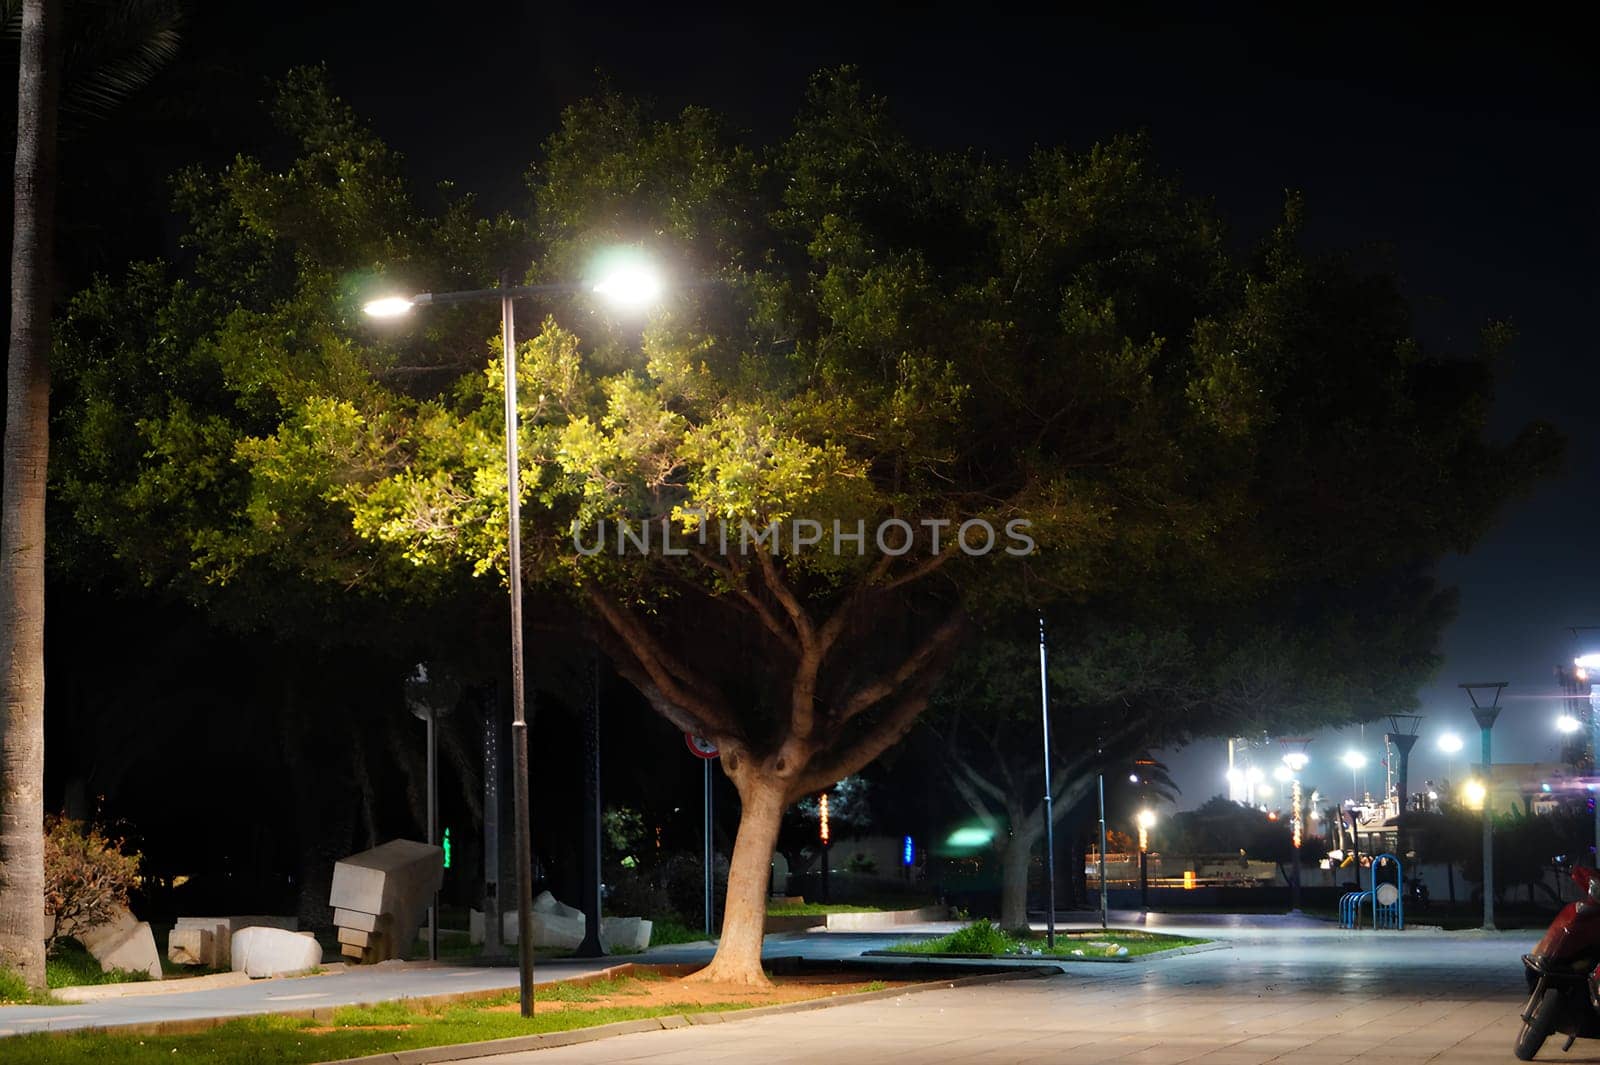 A tree is lit up at night, with a street light shining by gadreel